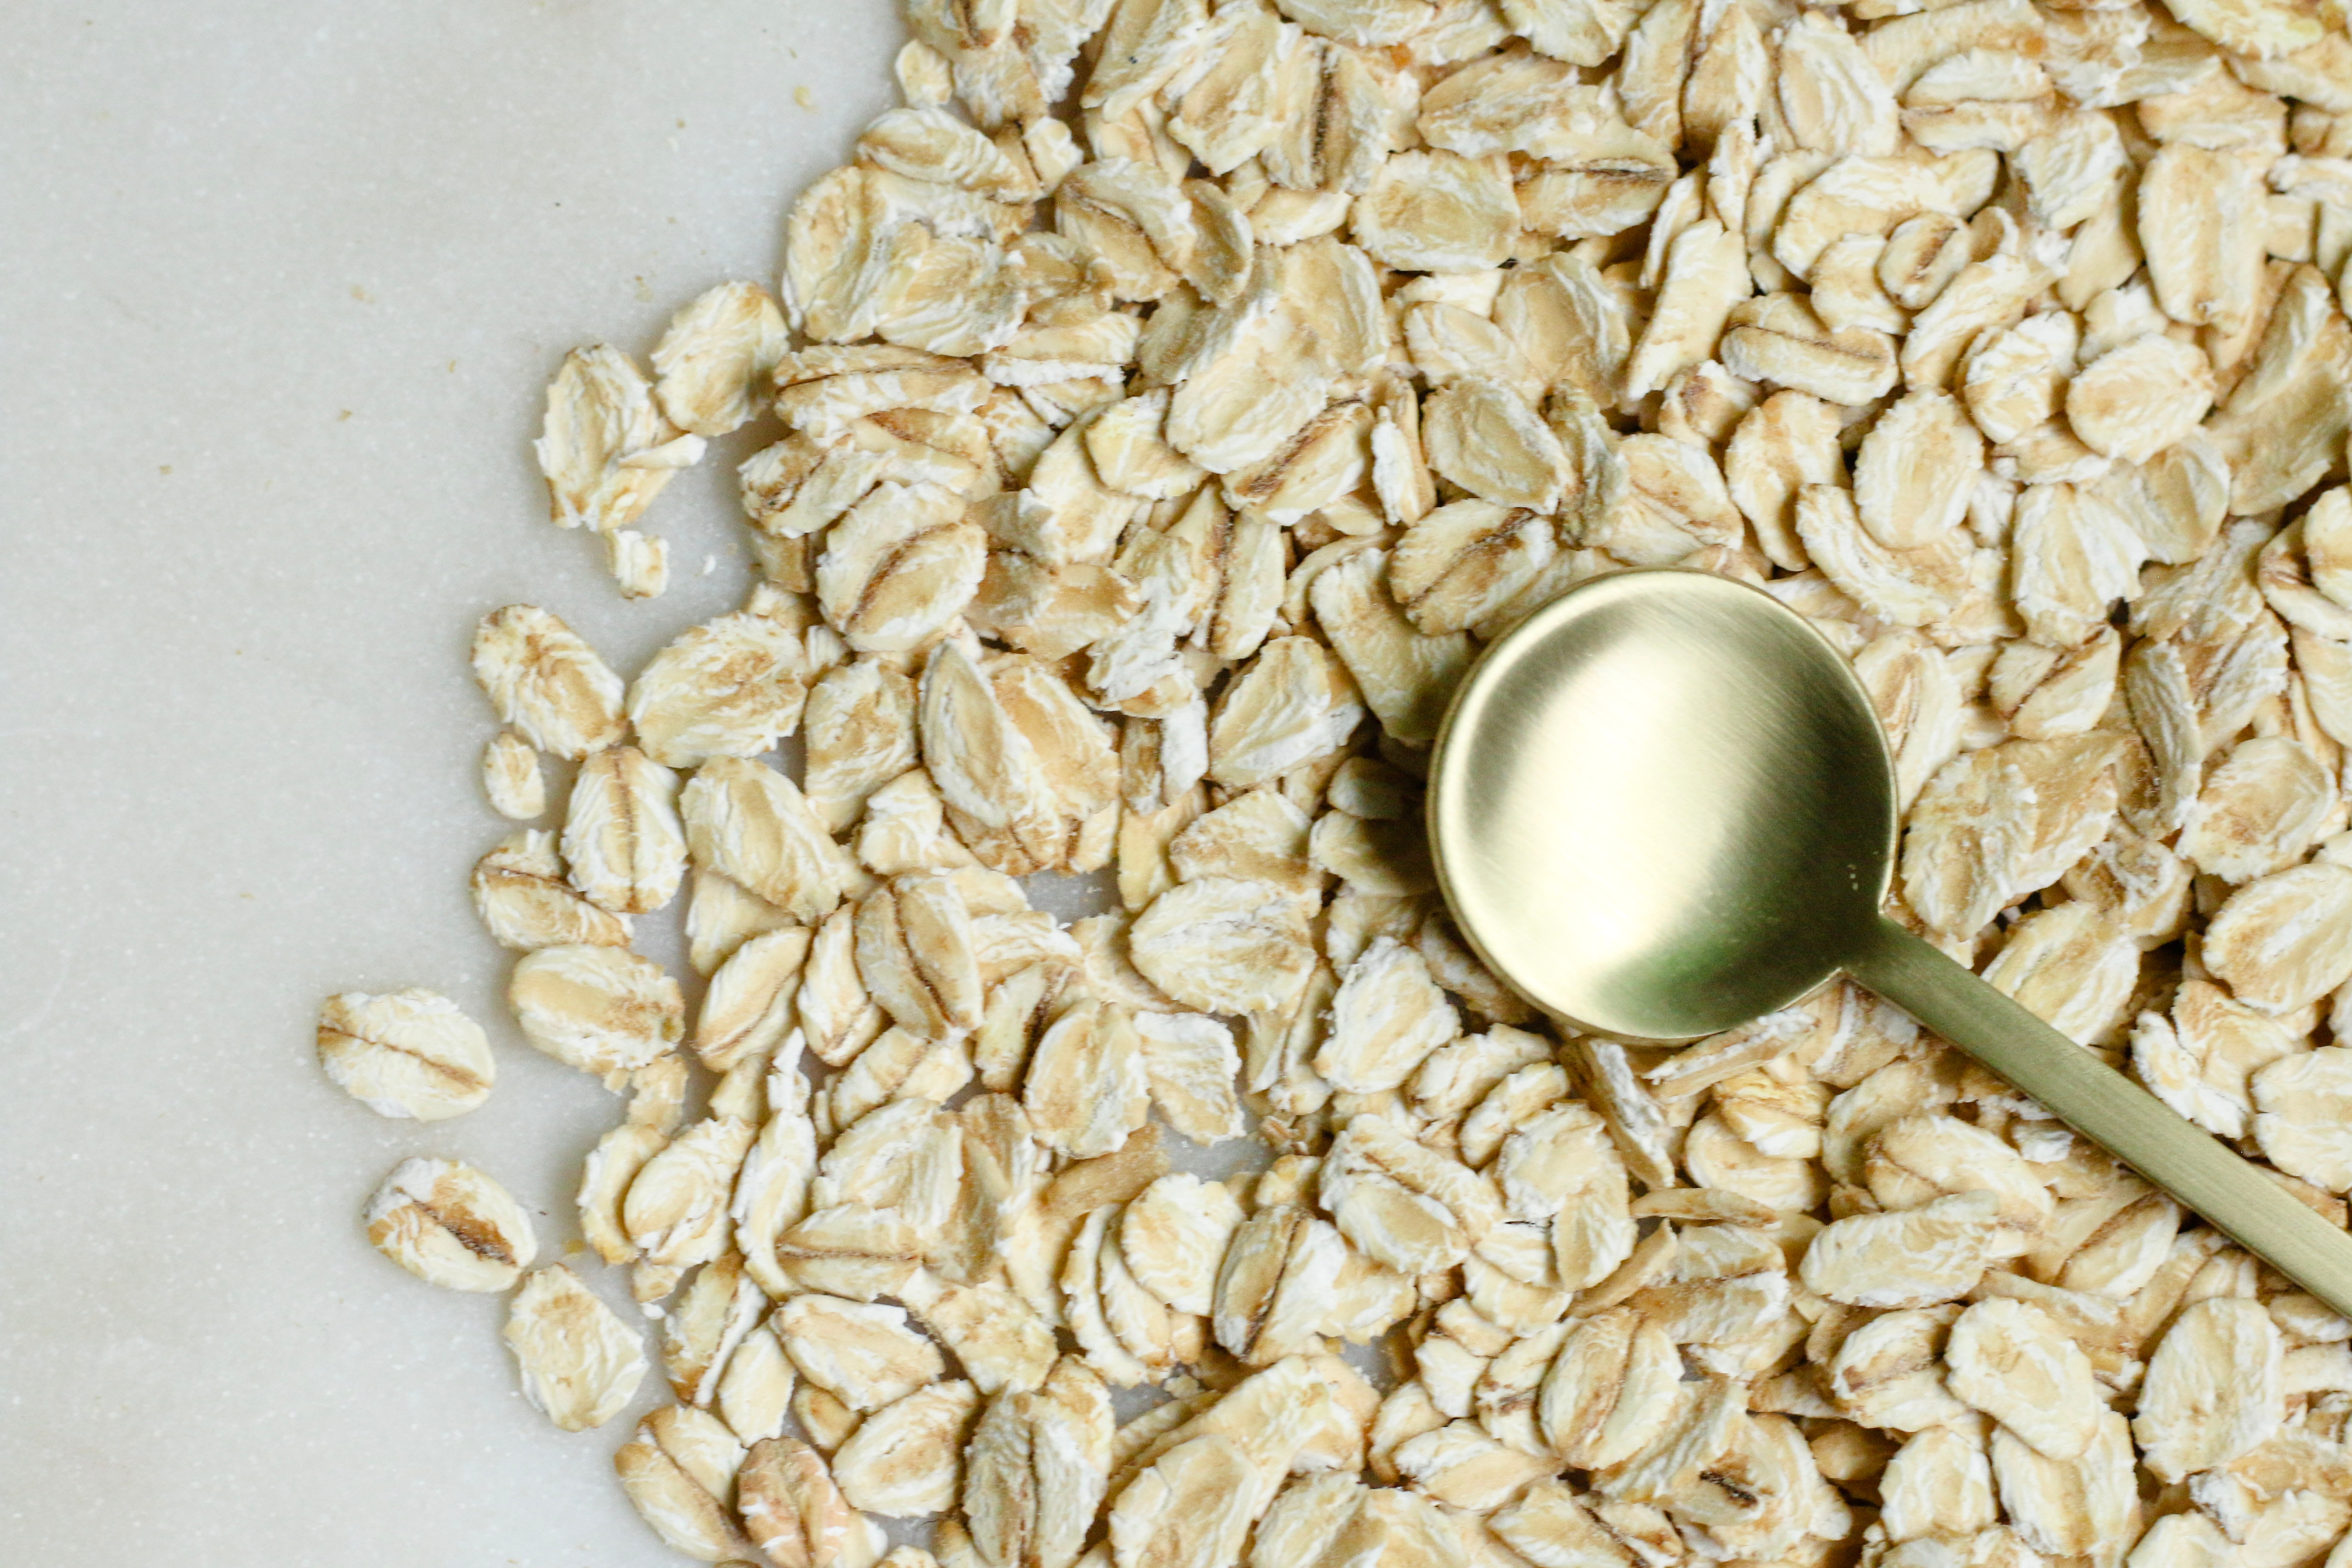 Oats on a surface with gold spoon